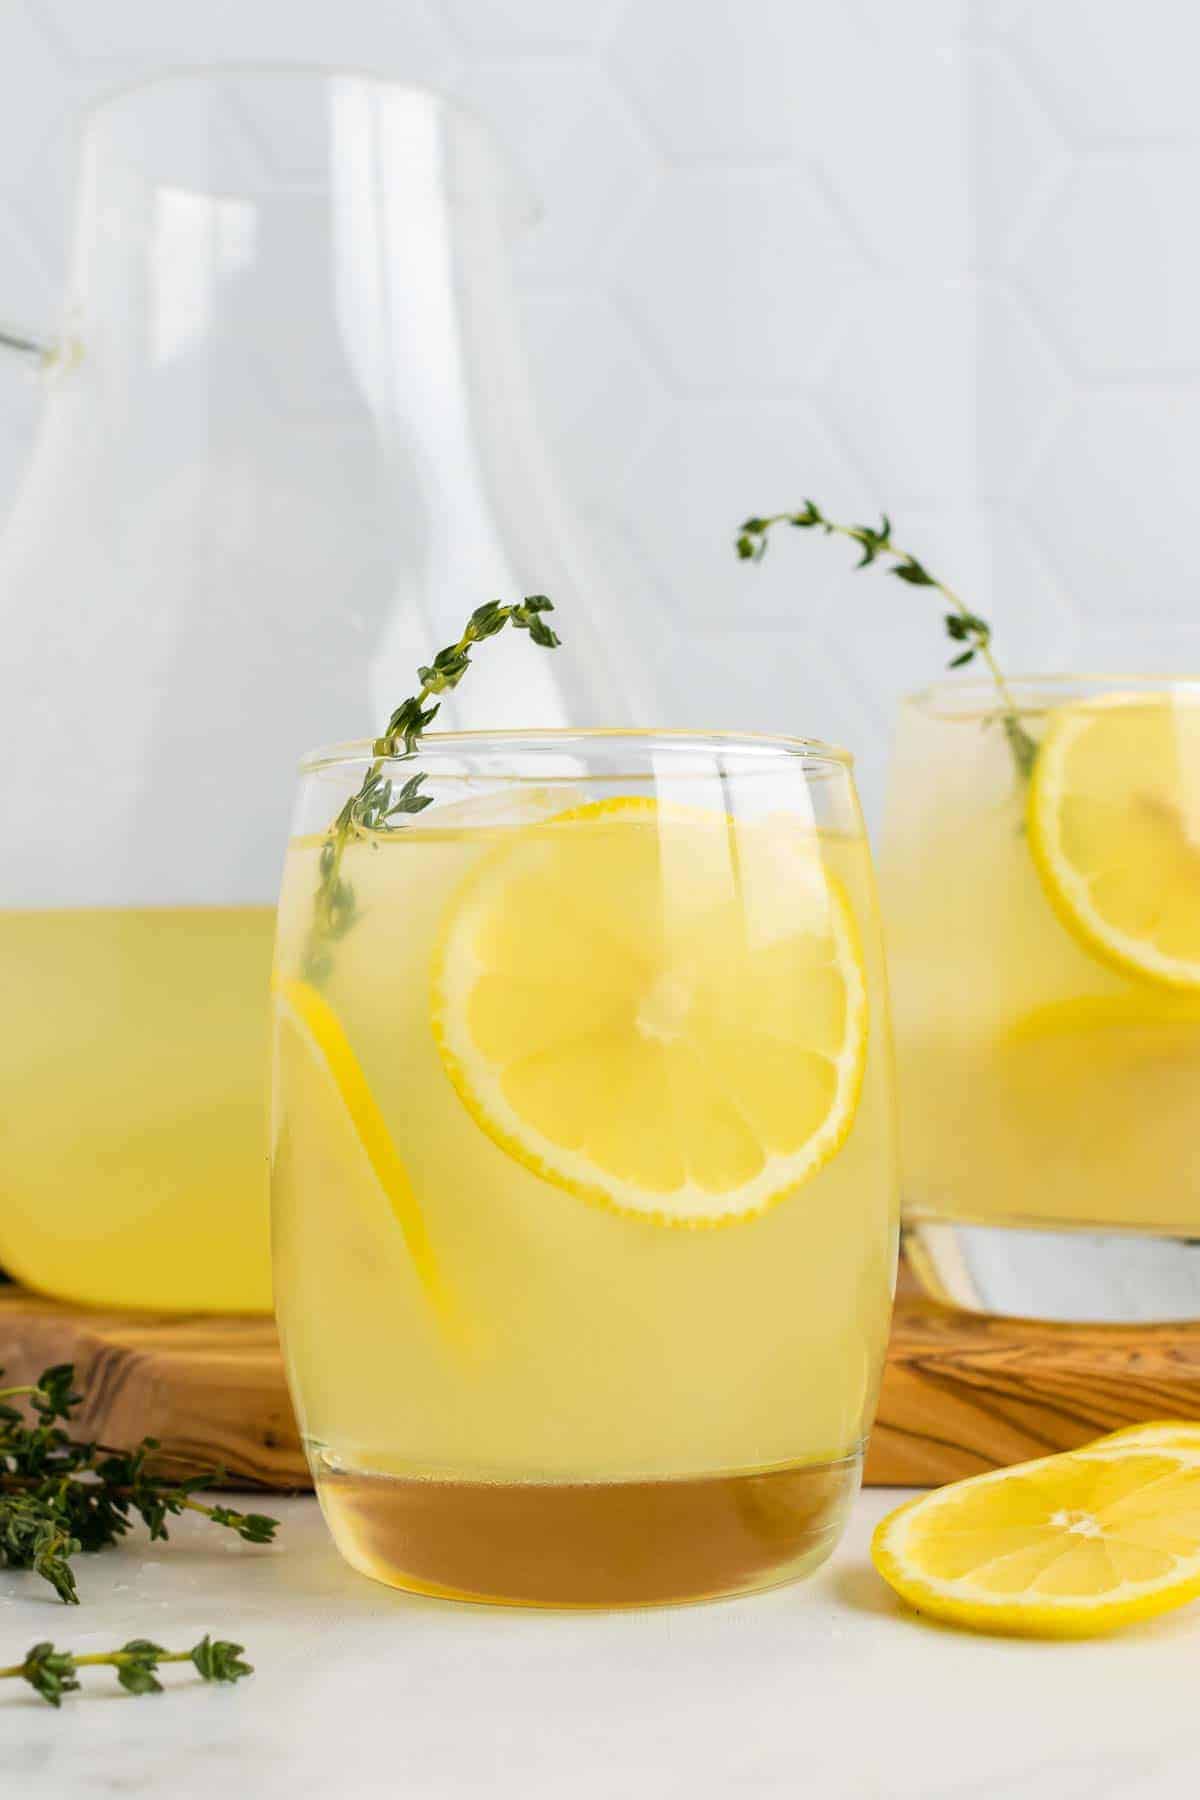 Two glasses of lemonade in front of pitcher